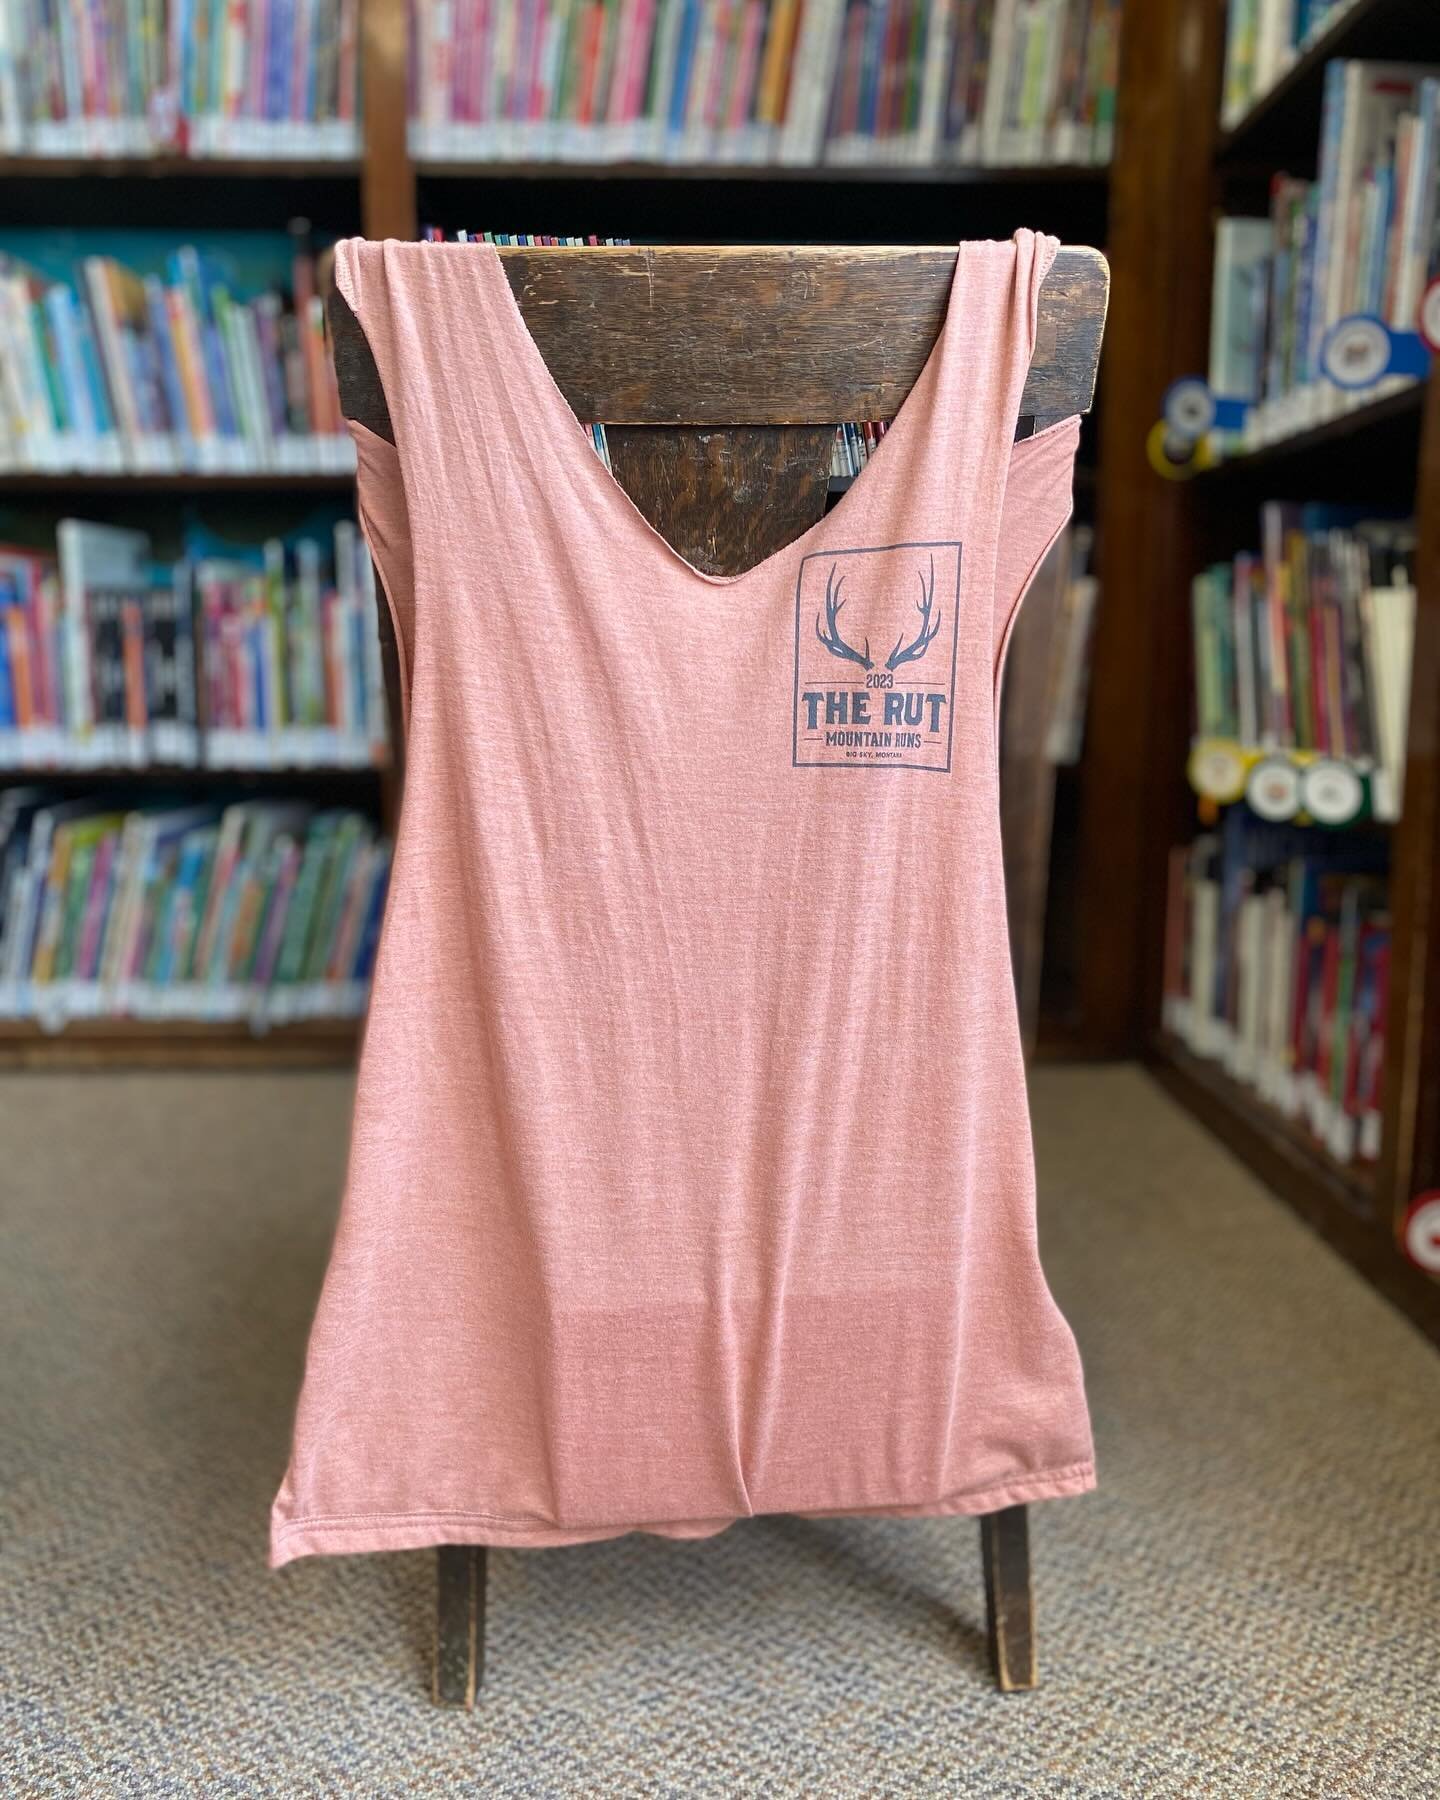 ~Wonder Wednesday~

Do you wonder what an Adventure Bag is?

It&rsquo;s a reusable bag made out of a t-shirt! This bag has been used to transport books back and forth almost every day since mid-January. It is a bit stretched out, but is still holding